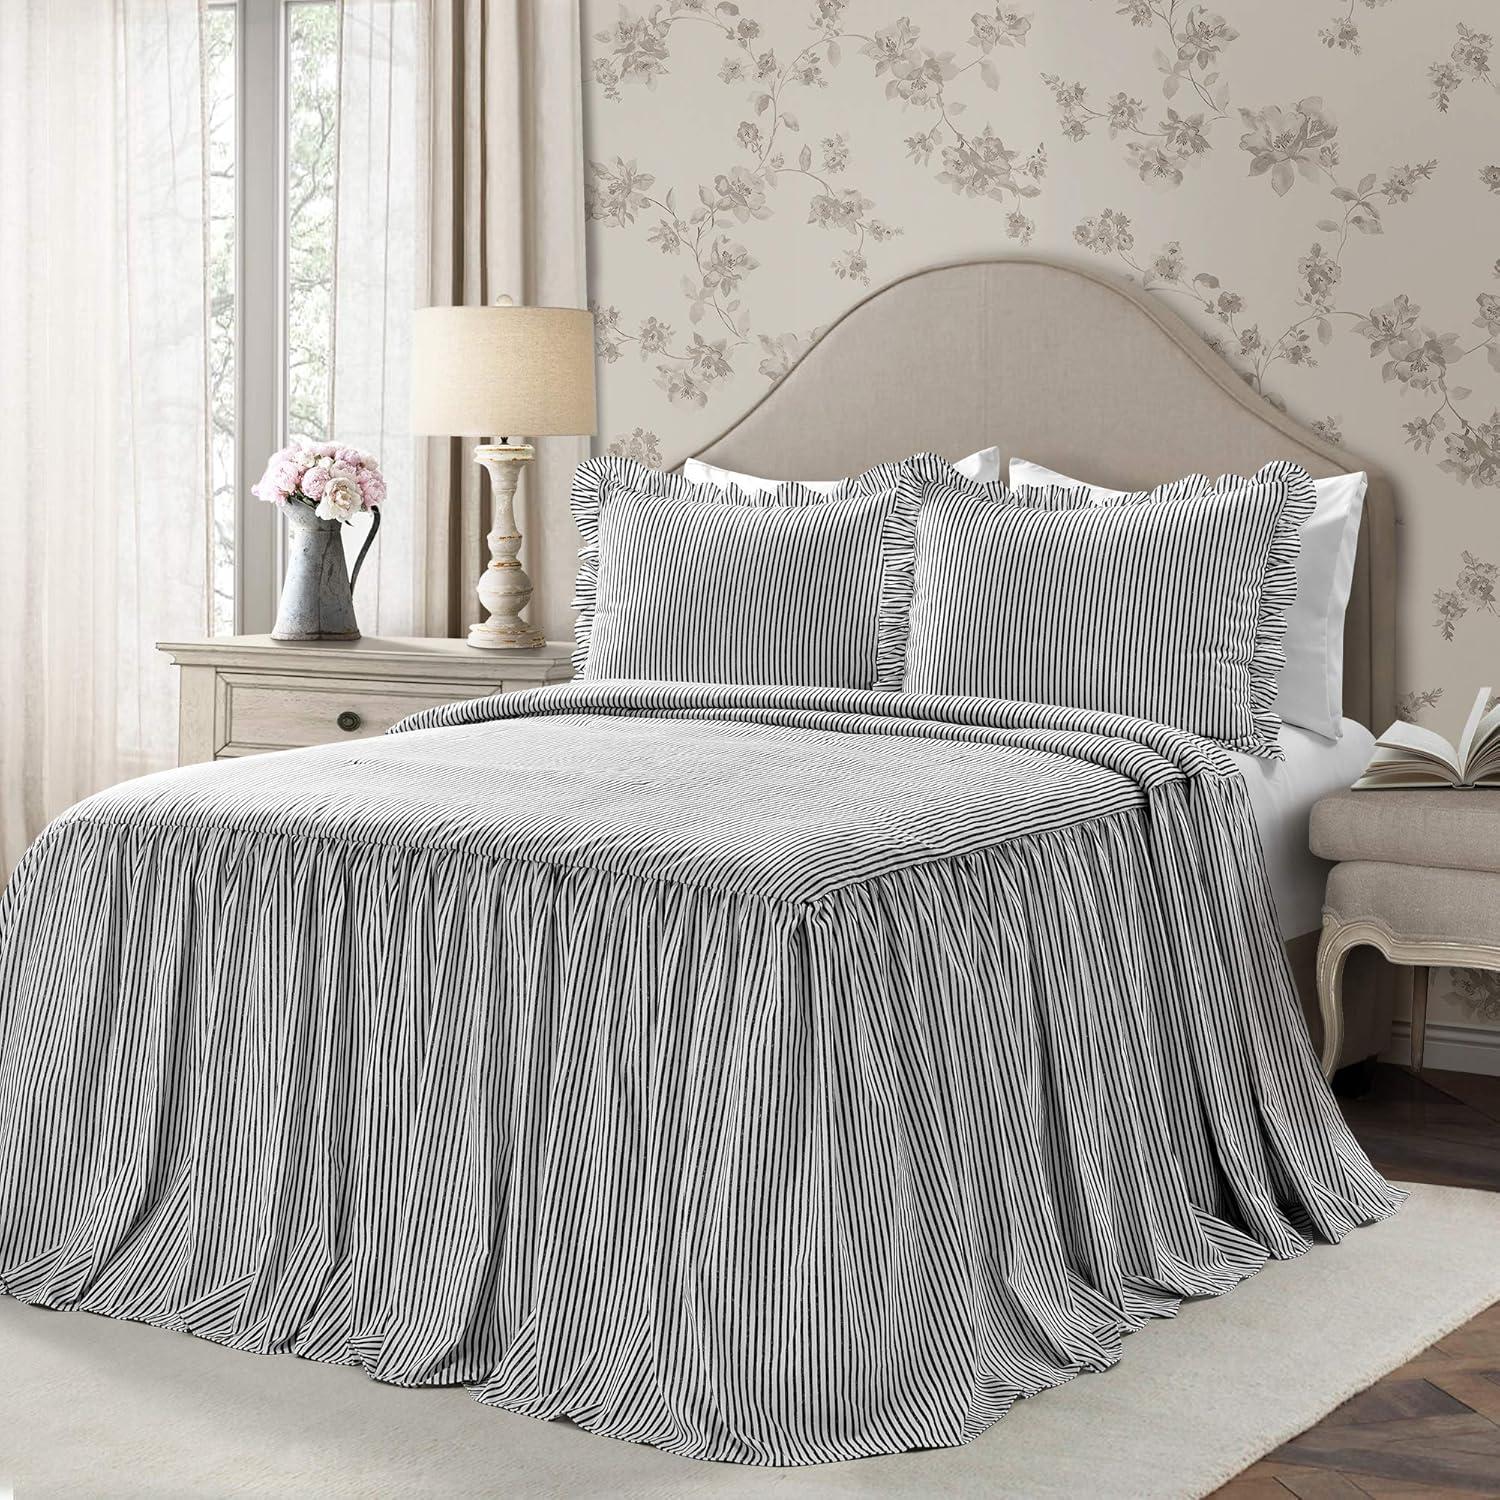 Elegant Black Ruffle-Edged Queen Bedspread Set with Pinstripes